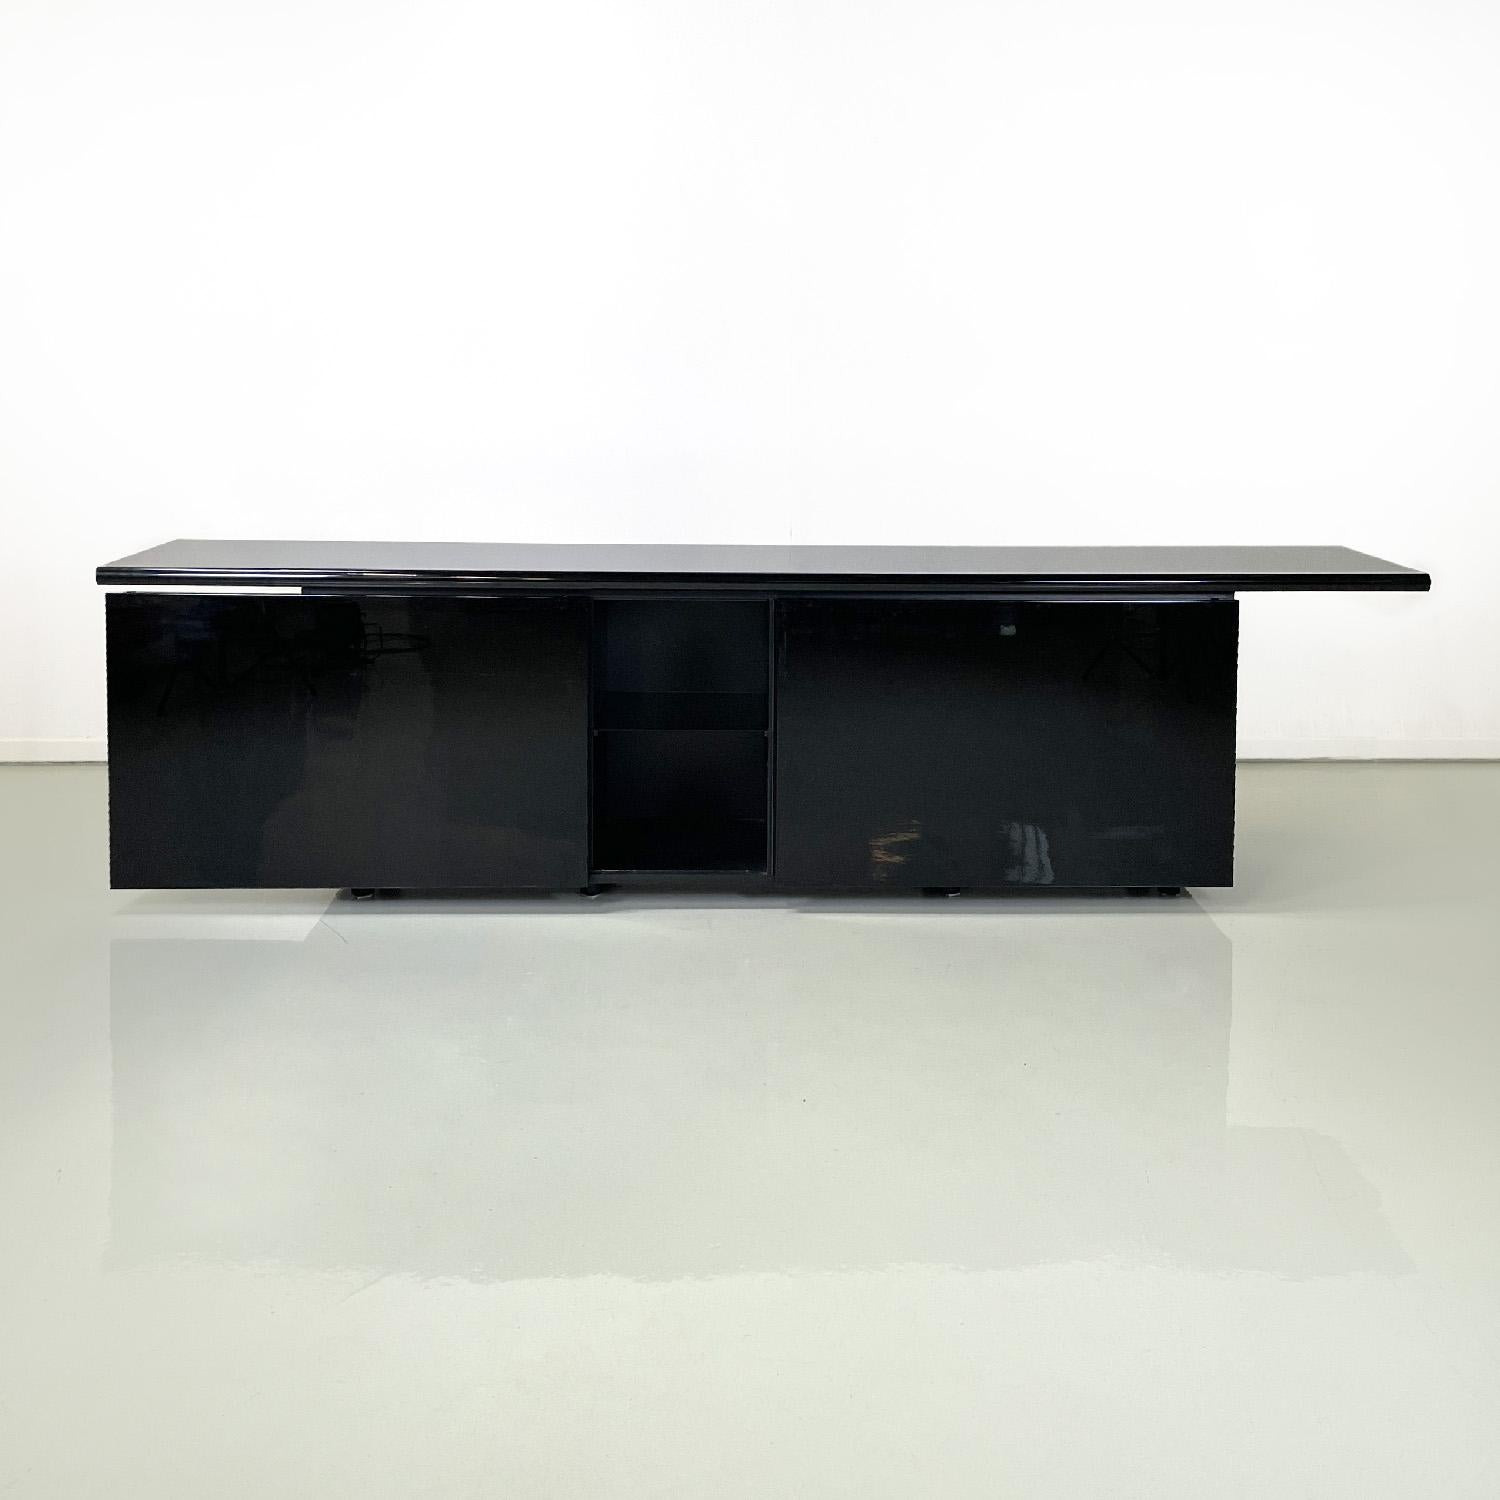 Late 20th Century Italian modern black sideboard Sheraton by Stoppino and Acerbis for Acerbis 1977